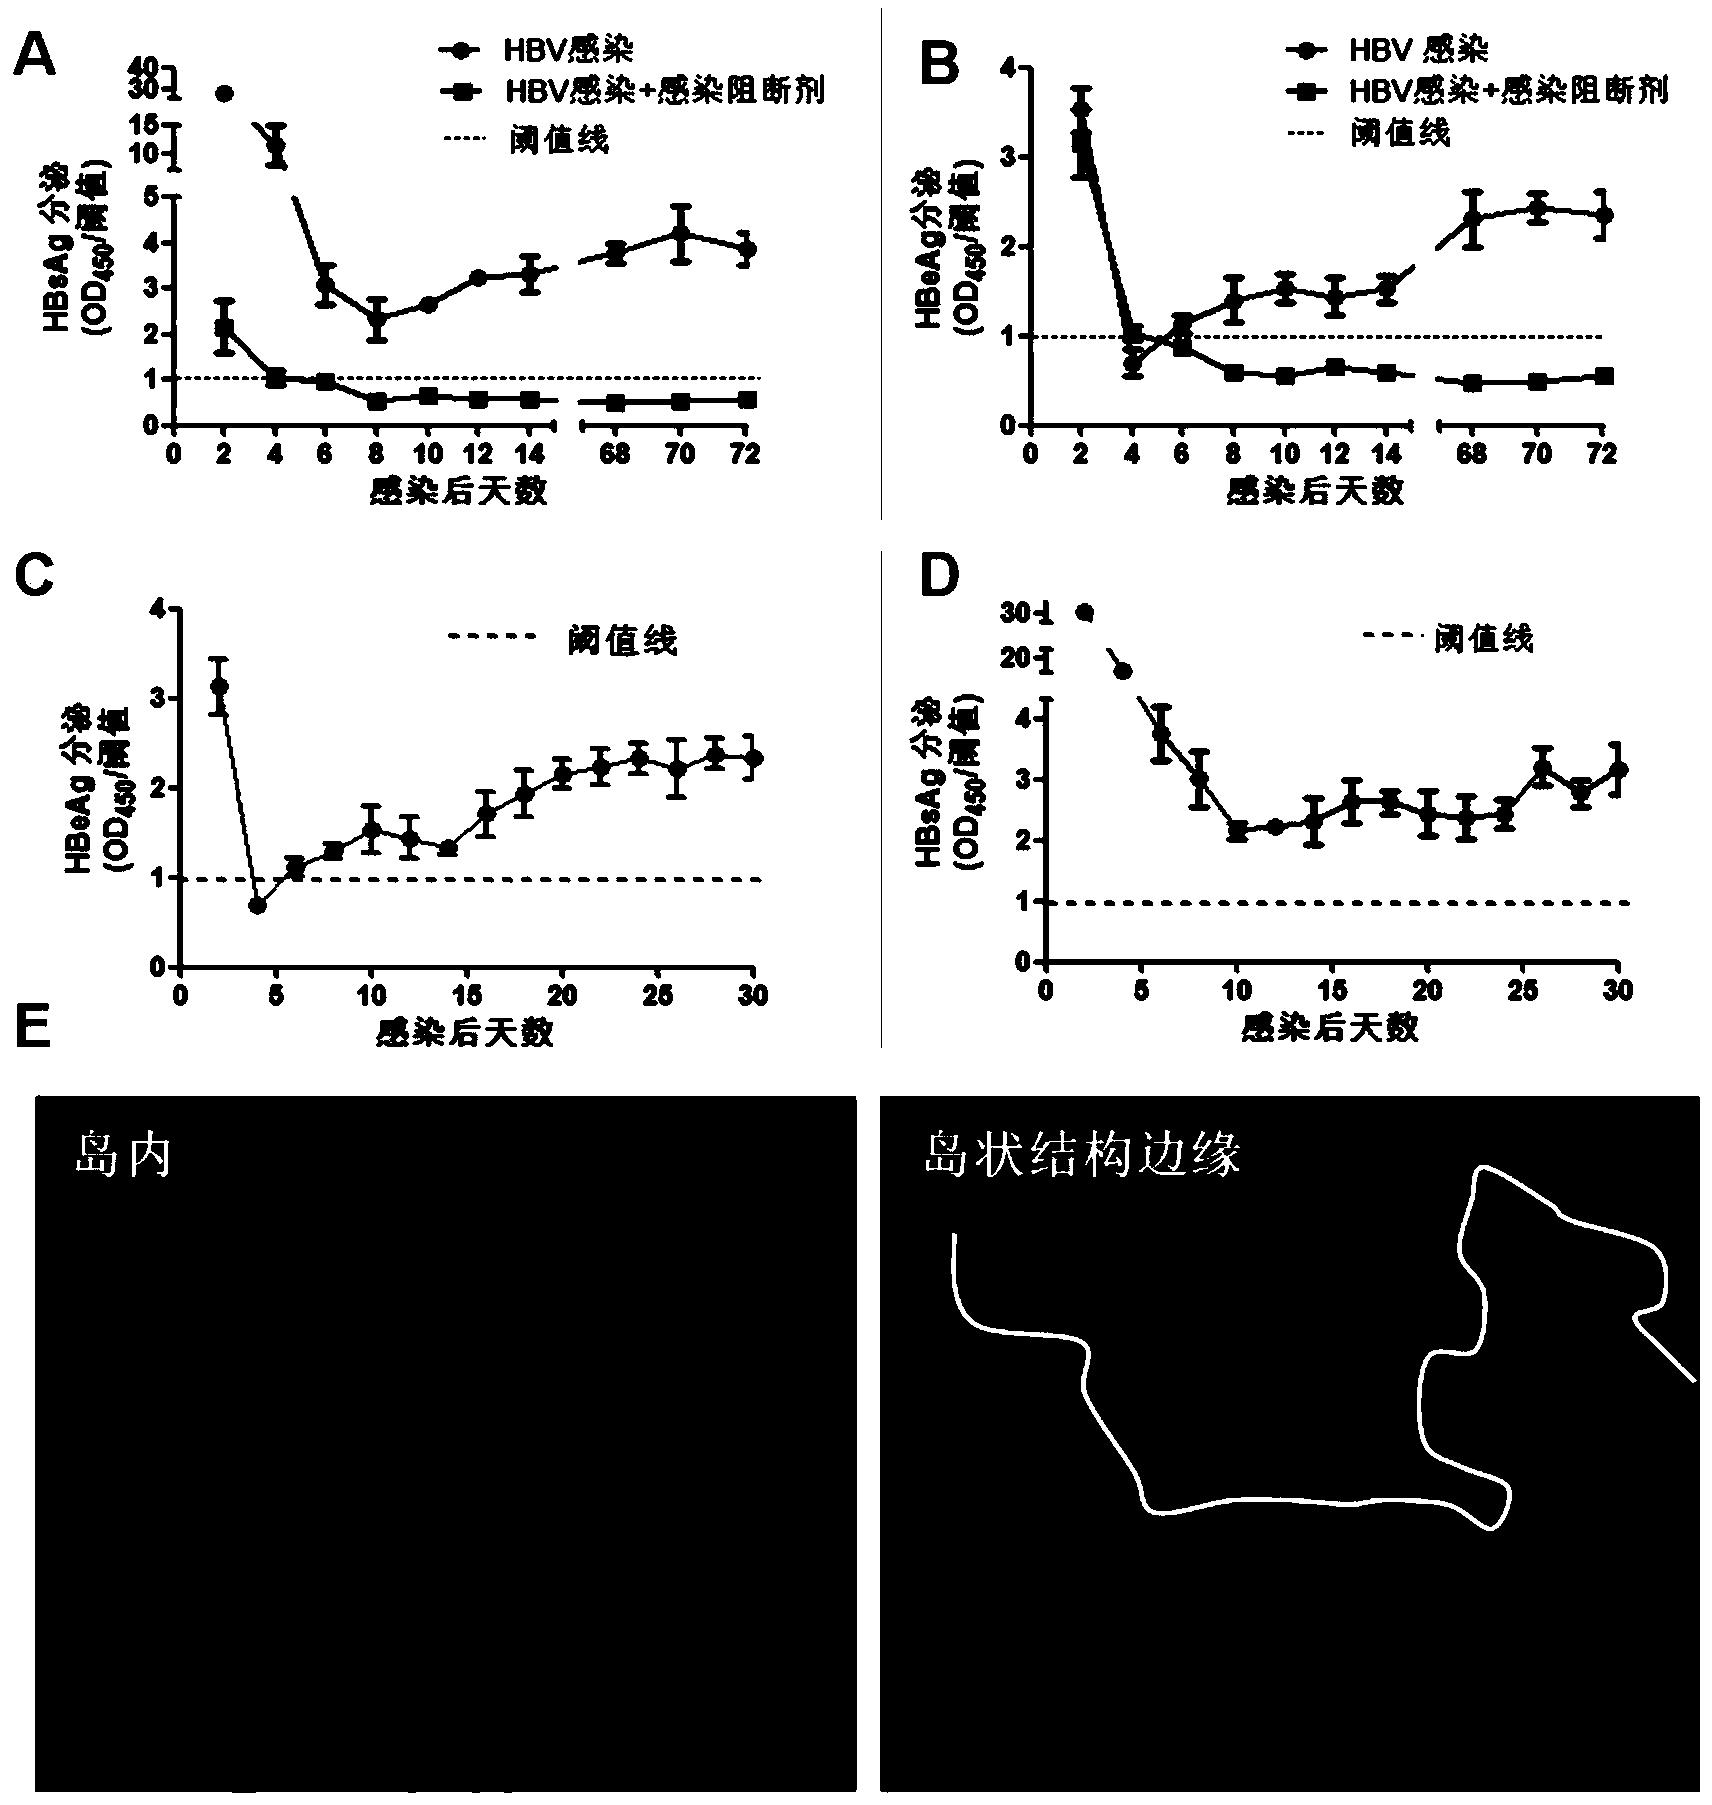 Co-culturing method of human primary hepatocytes and liver nonparenchymal cells